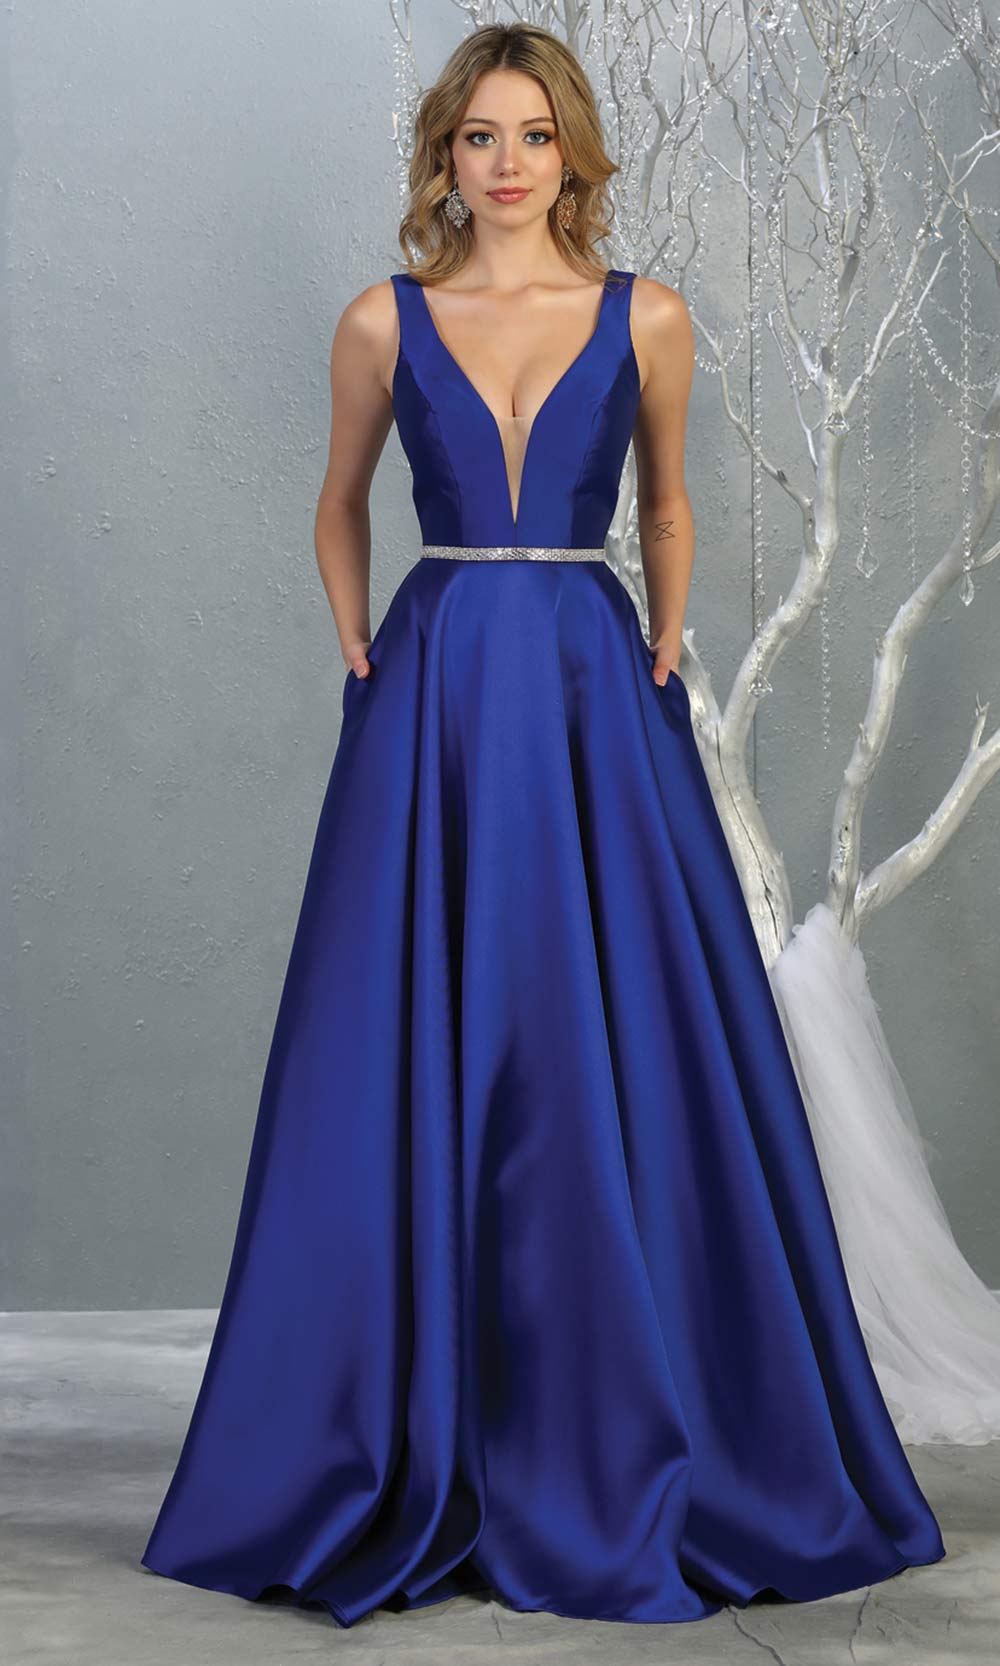 Mayqueen MQ1683 Long simple v neck royal blue semi ballgown with pockets. This royal blue flowy gown from mayqueen is perfect for prom, black tie event, engagement dress, formal party dress, plus size wedding guest dresses, bridesmaid, indowestern party dress